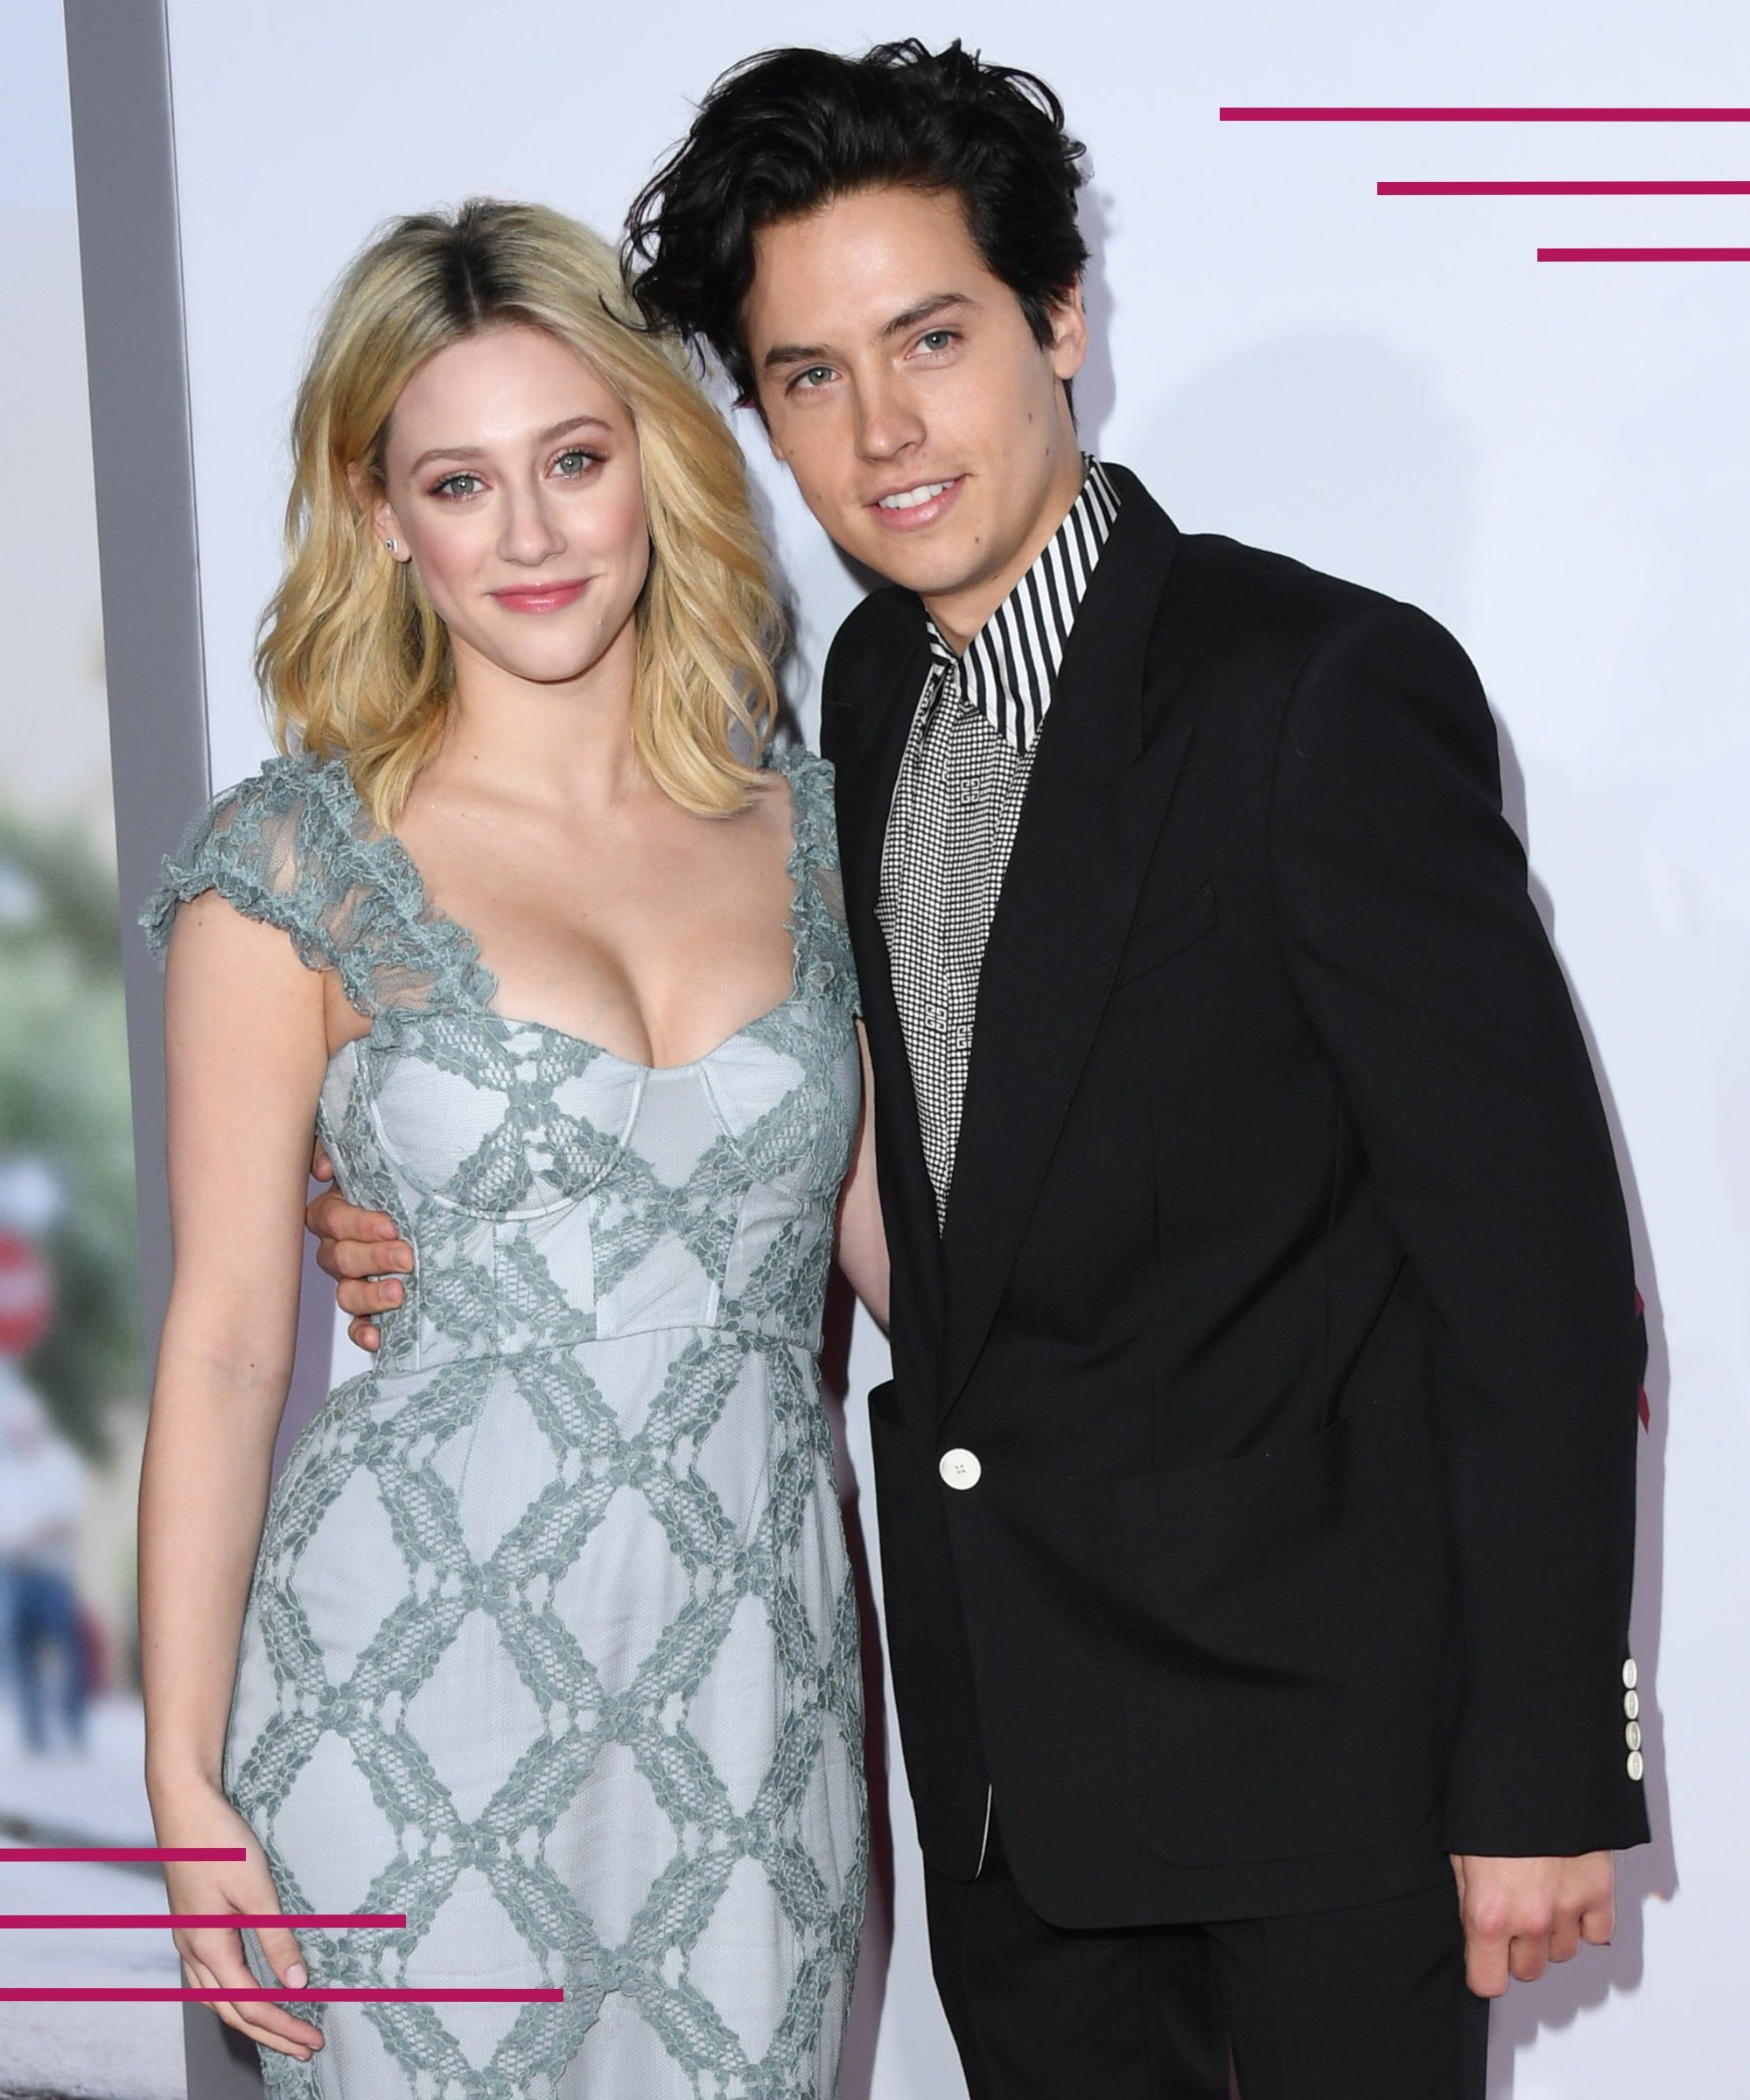 Lili Reinhart And Cole Sprouse Together, Kissing Insta